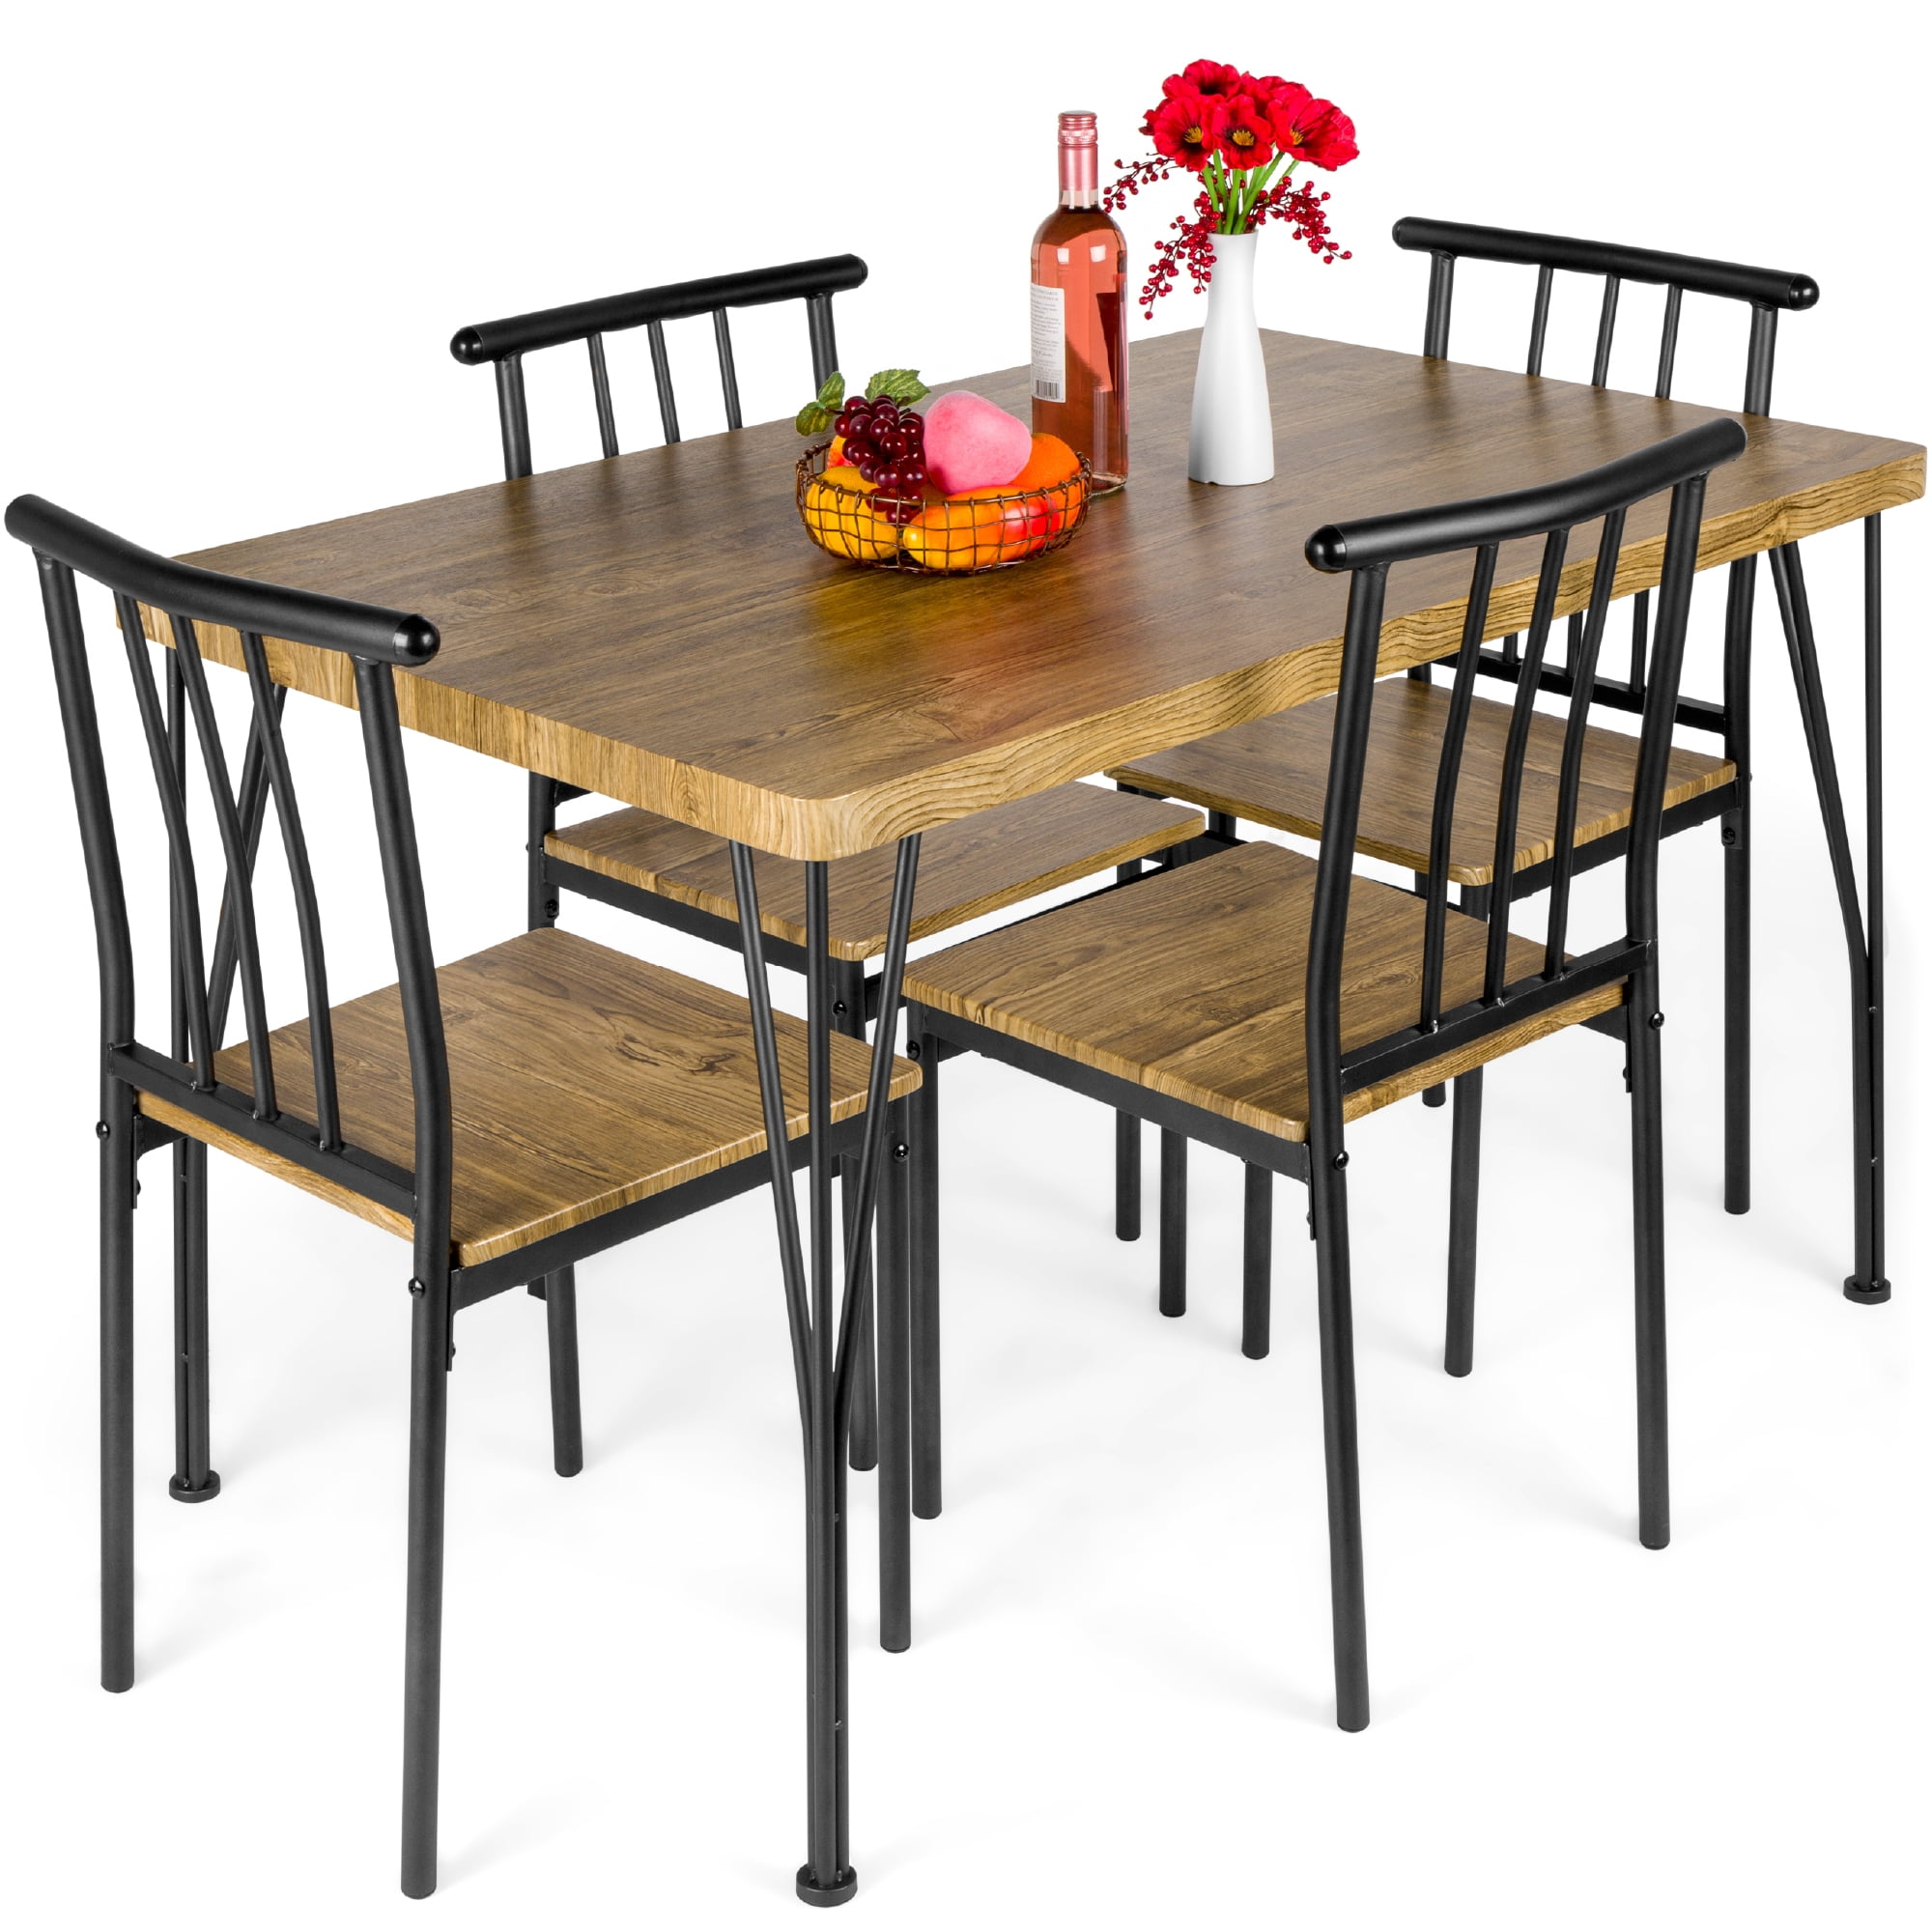 Best Choice Products 5 Piece Indoor Modern Metal And Wood Rectangular Dining Table Furniture Set W 4 Chairs Brown Walmart Com Walmart Com